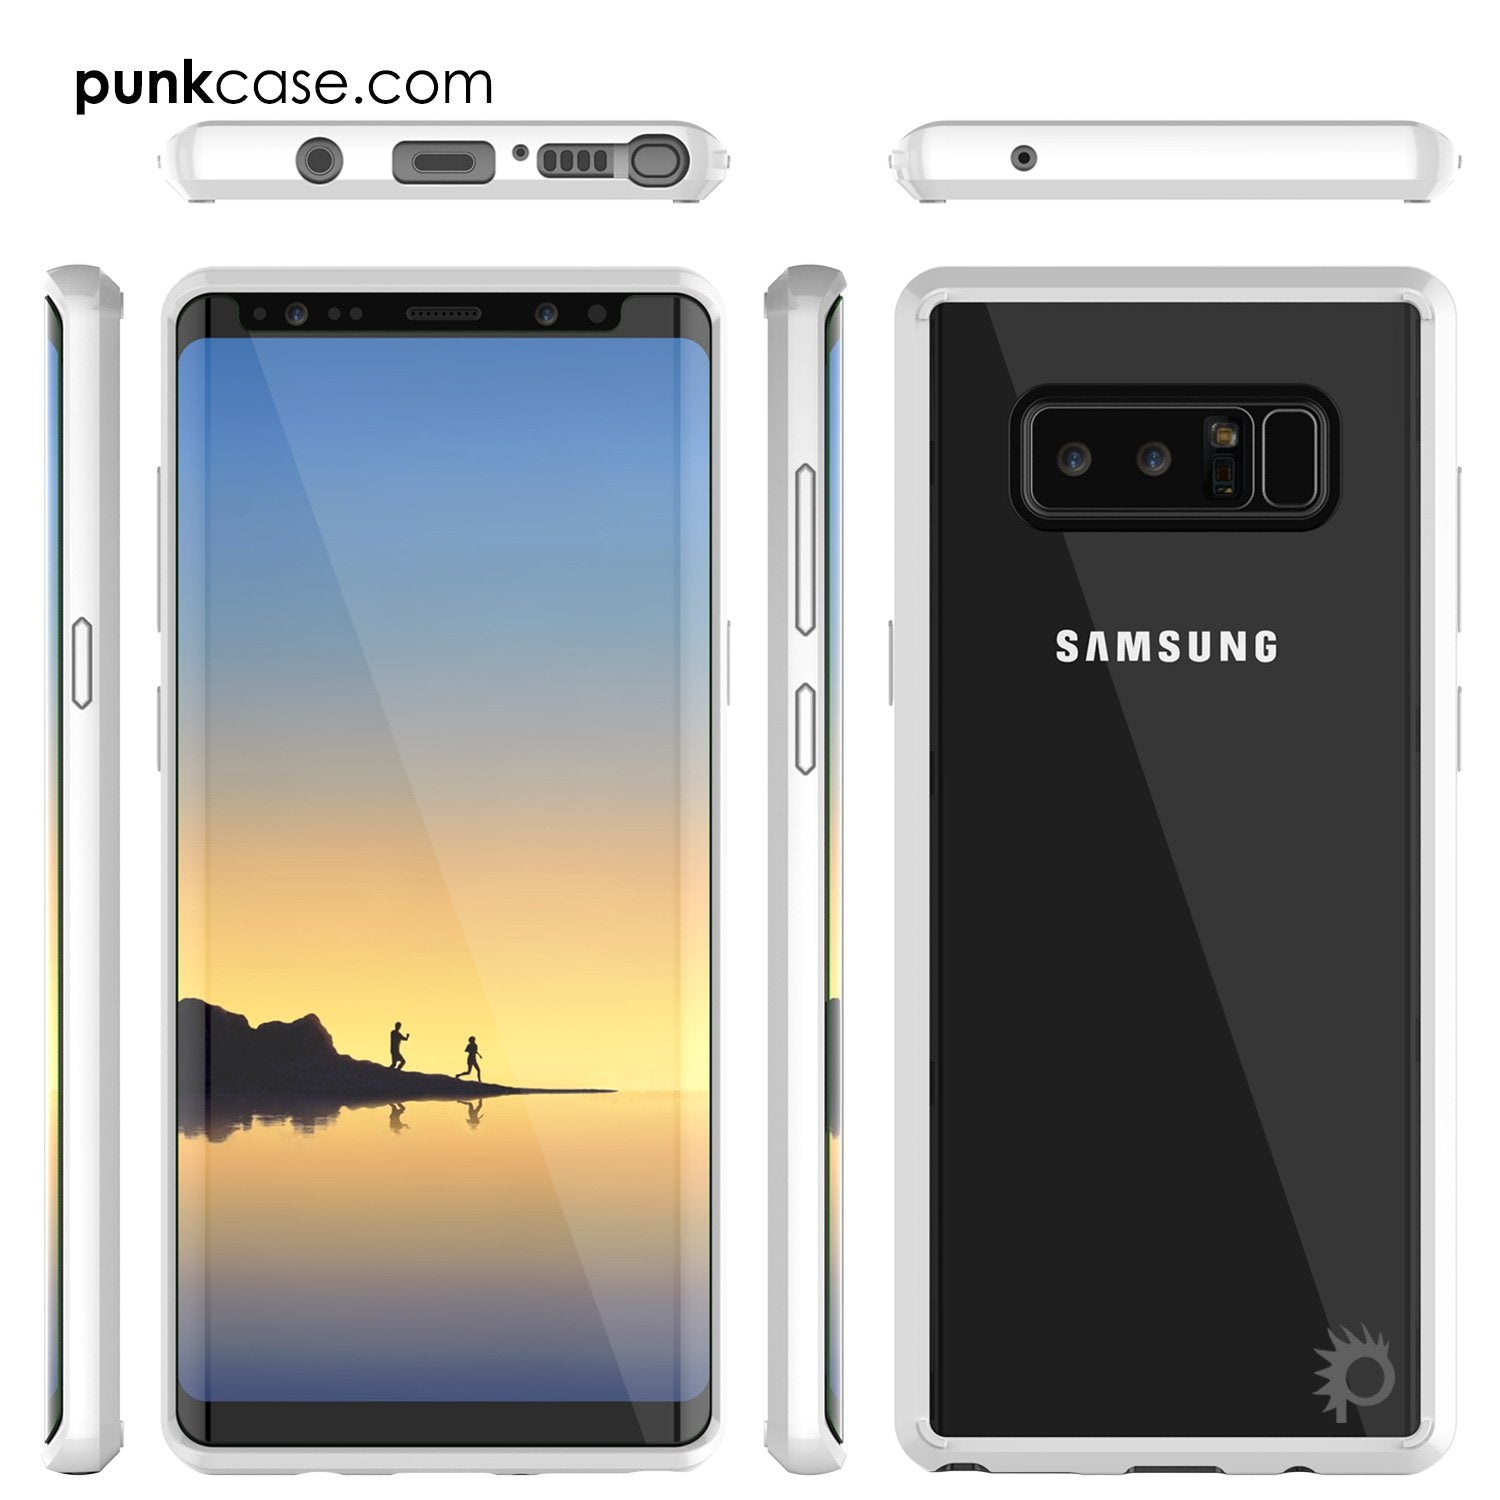 Galaxy Note 8 Case, PUNKcase [LUCID 2.0 Series] [Slim Fit] Armor Cover w/Integrated Anti-Shock System & PUNKSHIELD Screen Protector [White]